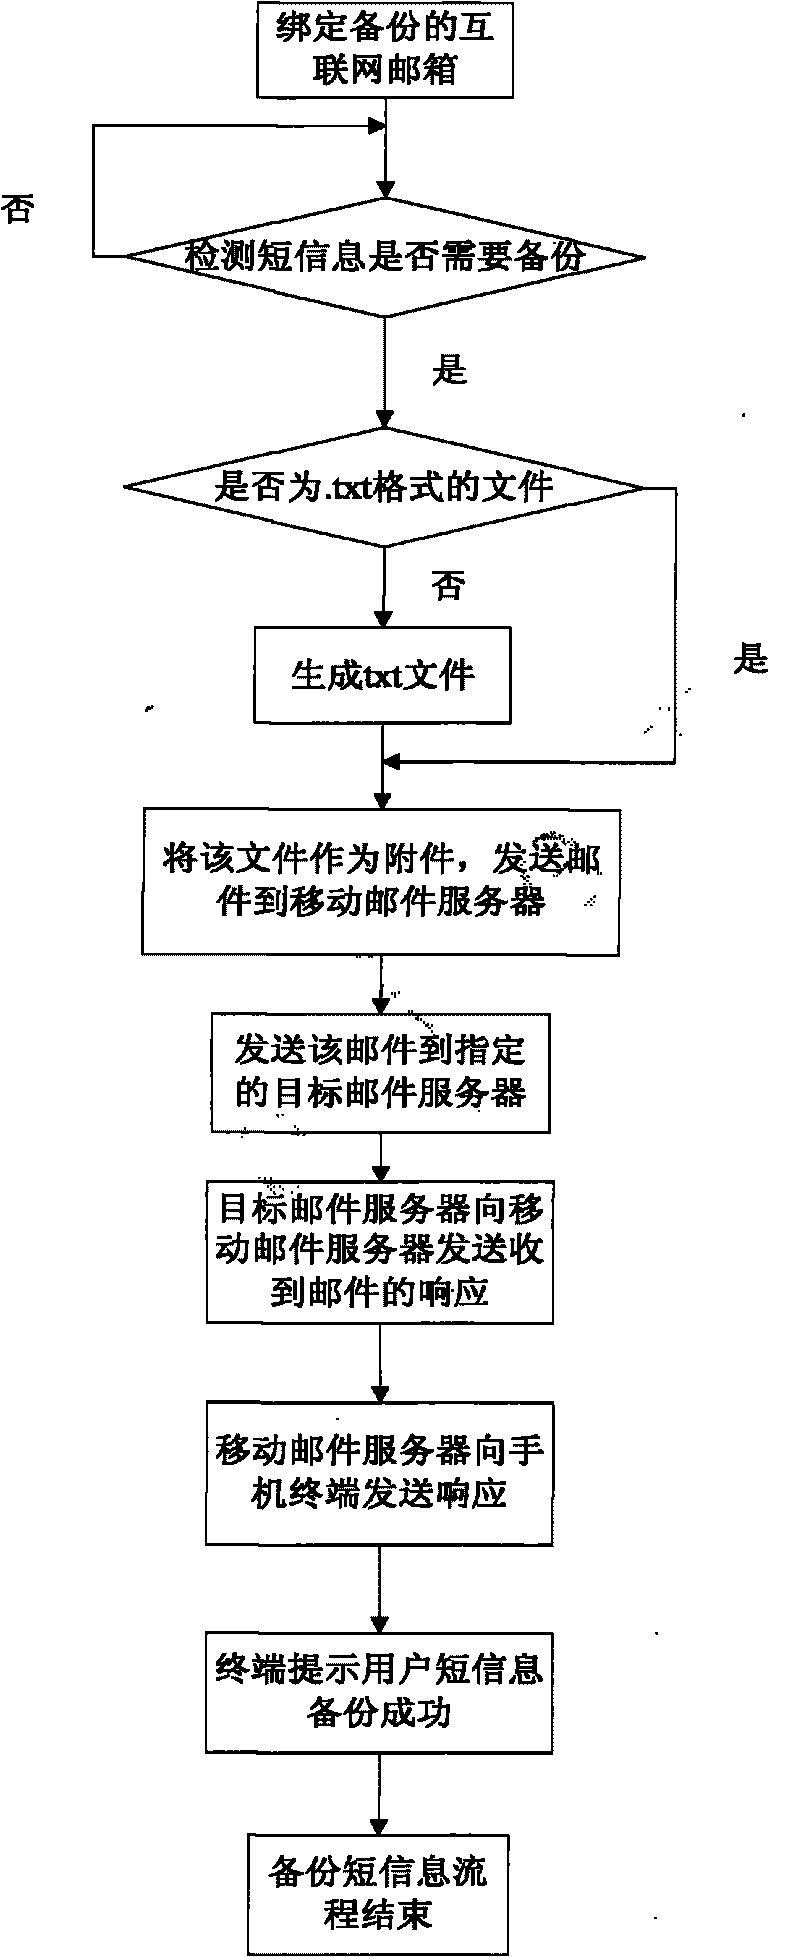 Method and system for backing up mobile phone short messages